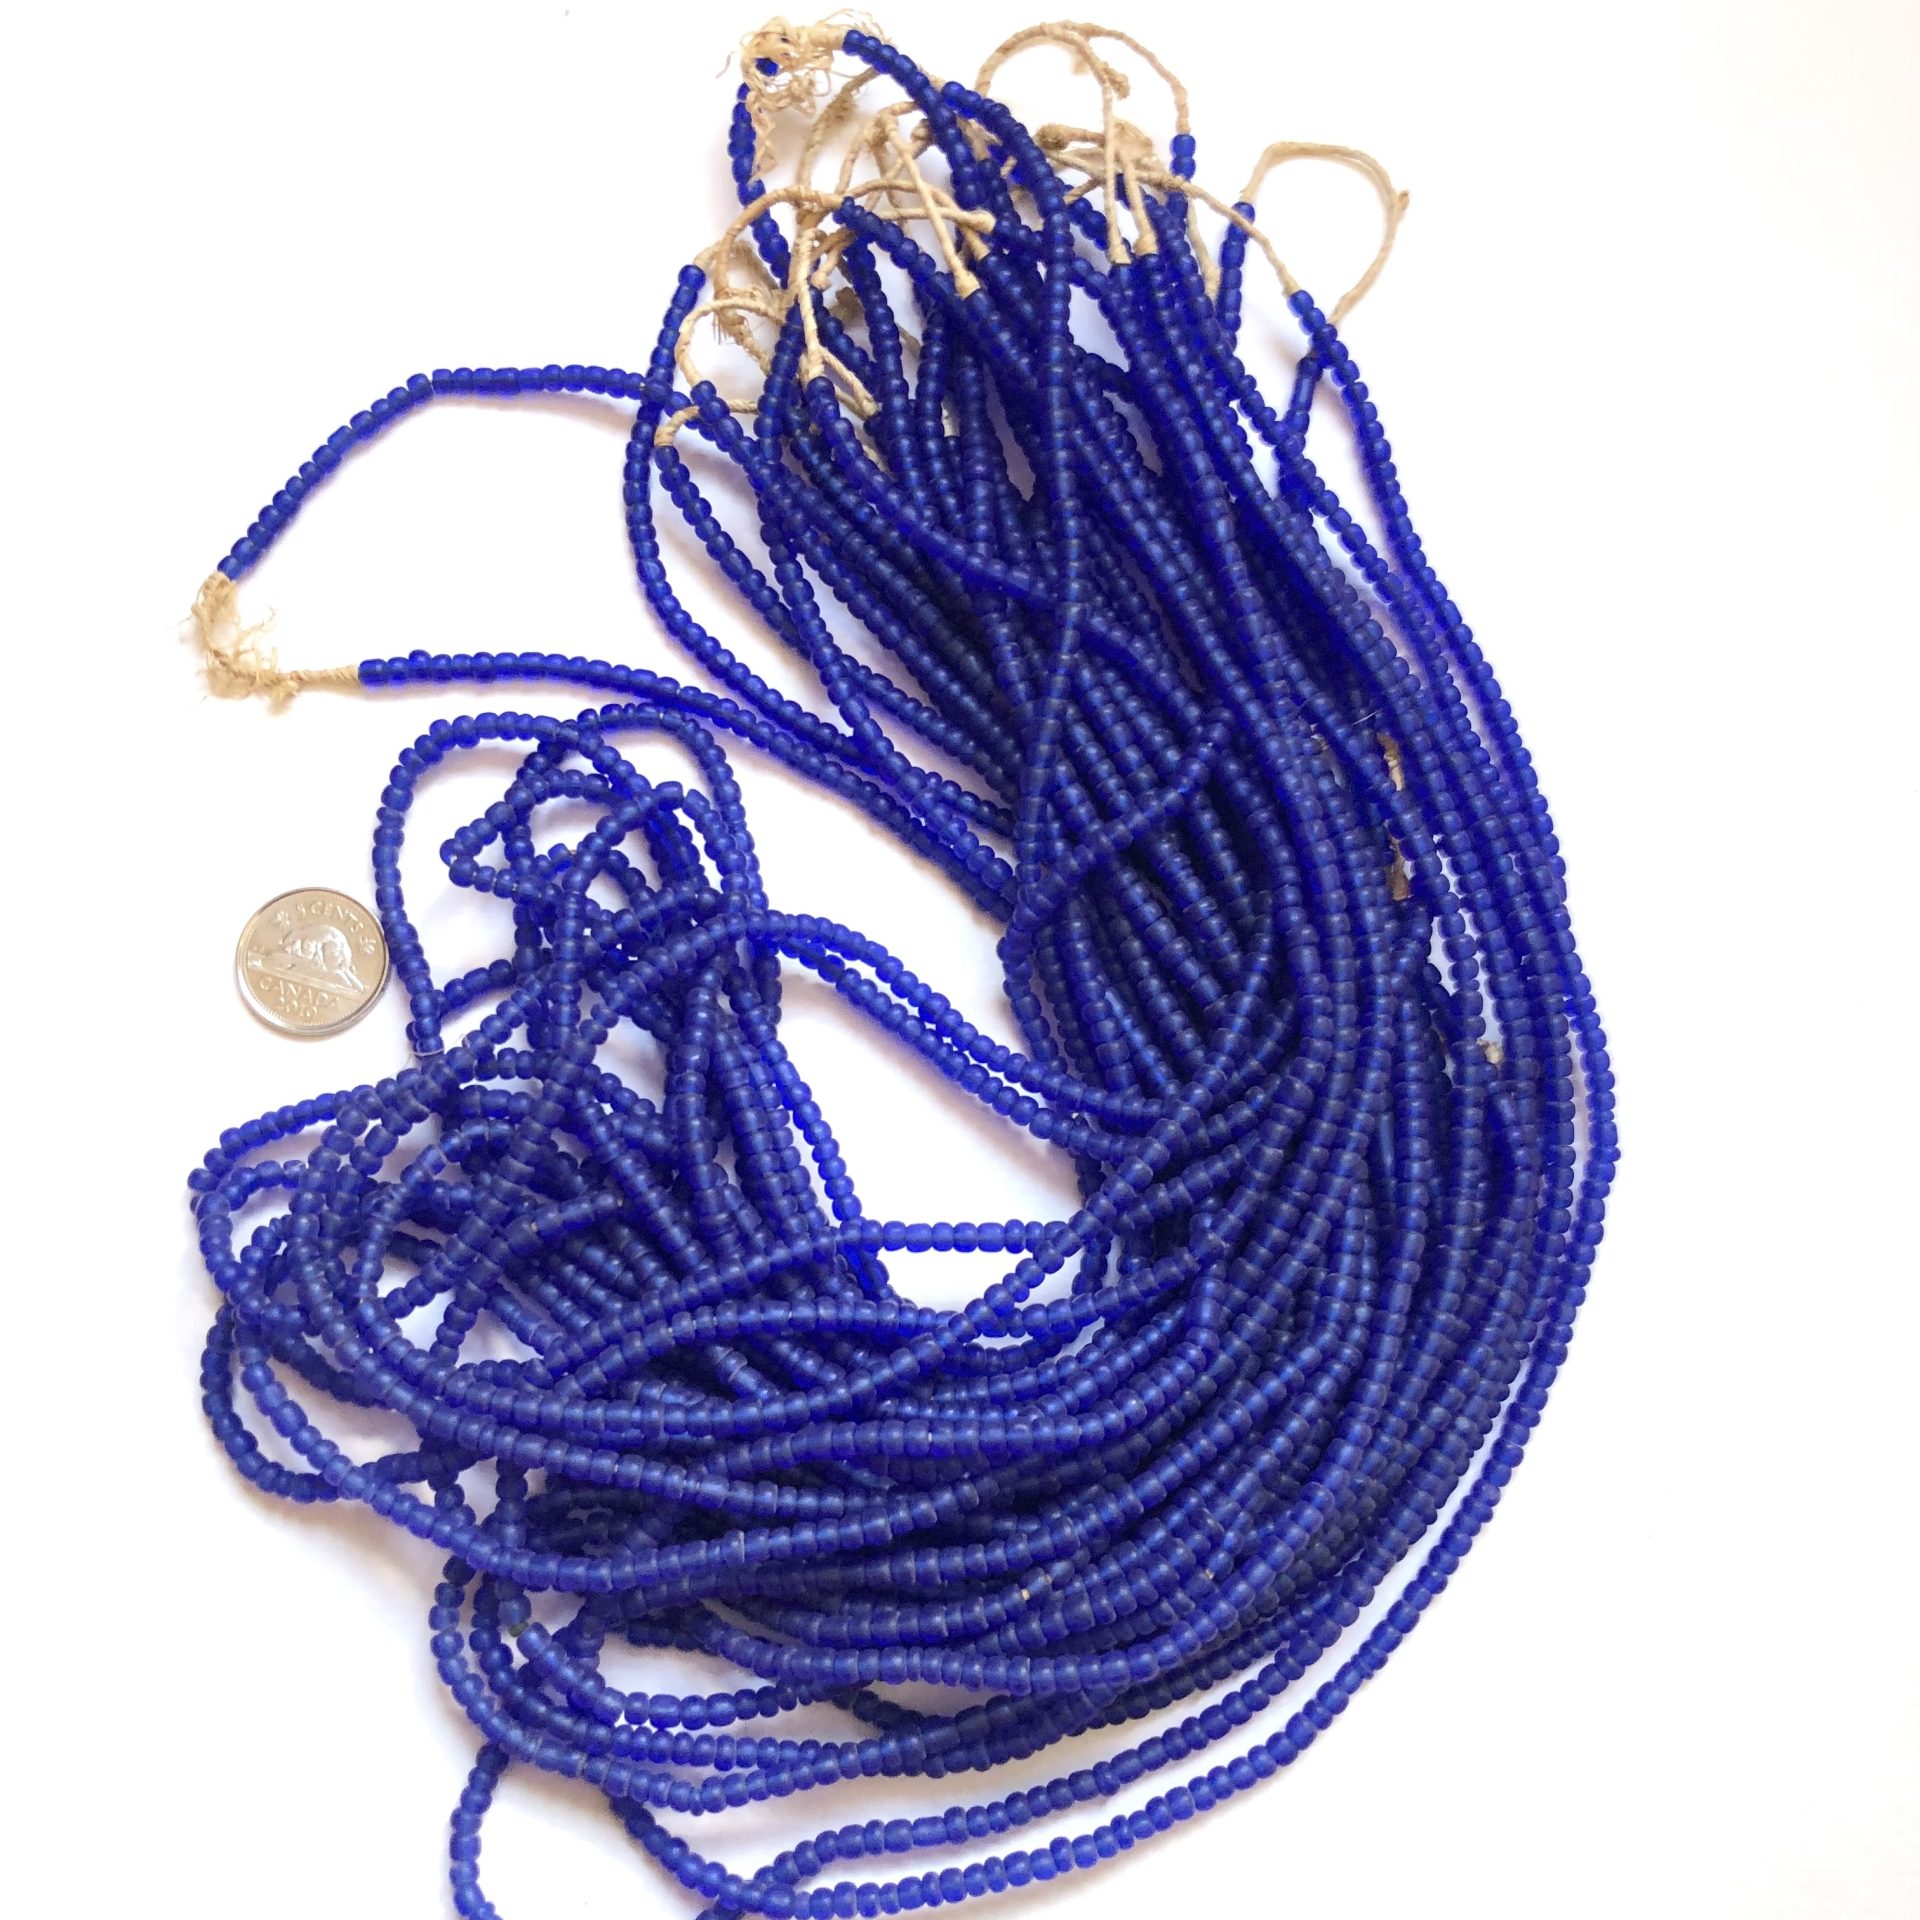 Translucent Royal Blue Small Glass Beads